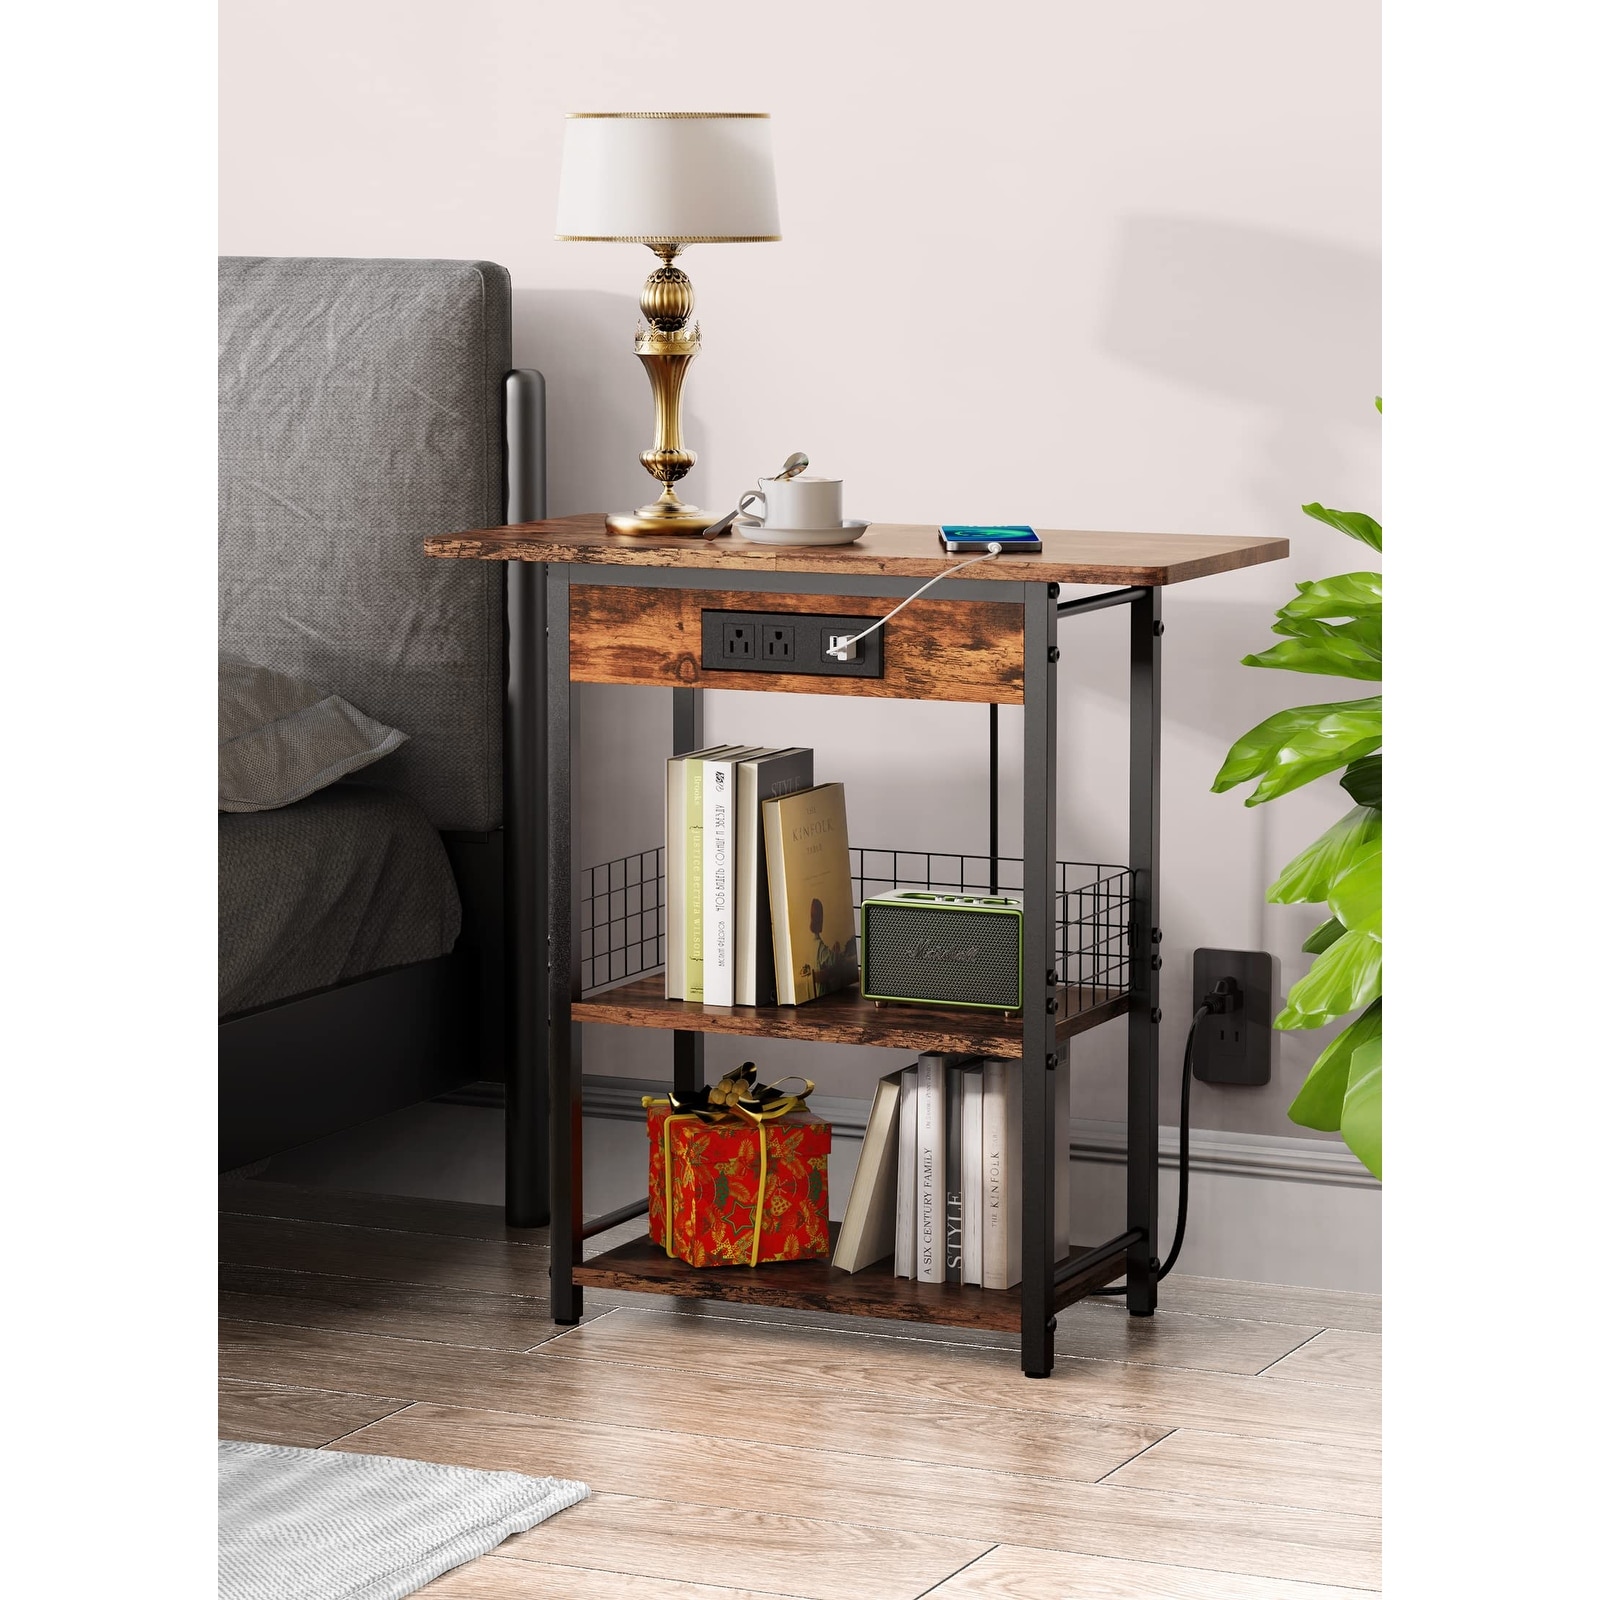 End Table with Charging Station, Narrow Side Table with USB Ports and  Outlets, Sofa Couch Table for Small Spaces Bed Bath  Beyond 37636370